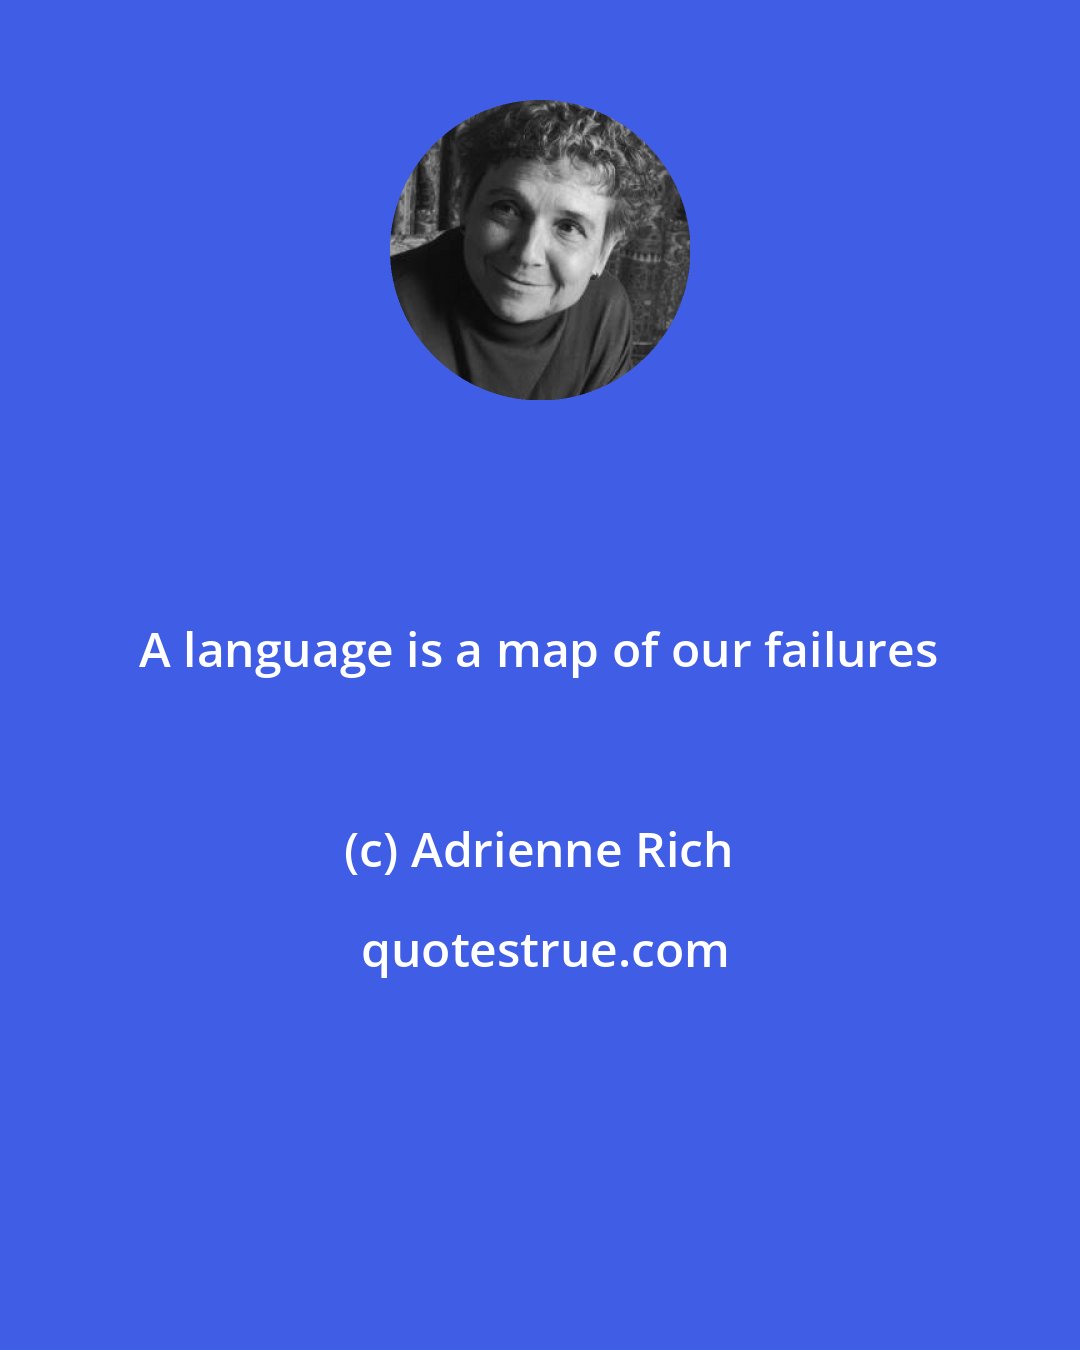 Adrienne Rich: A language is a map of our failures